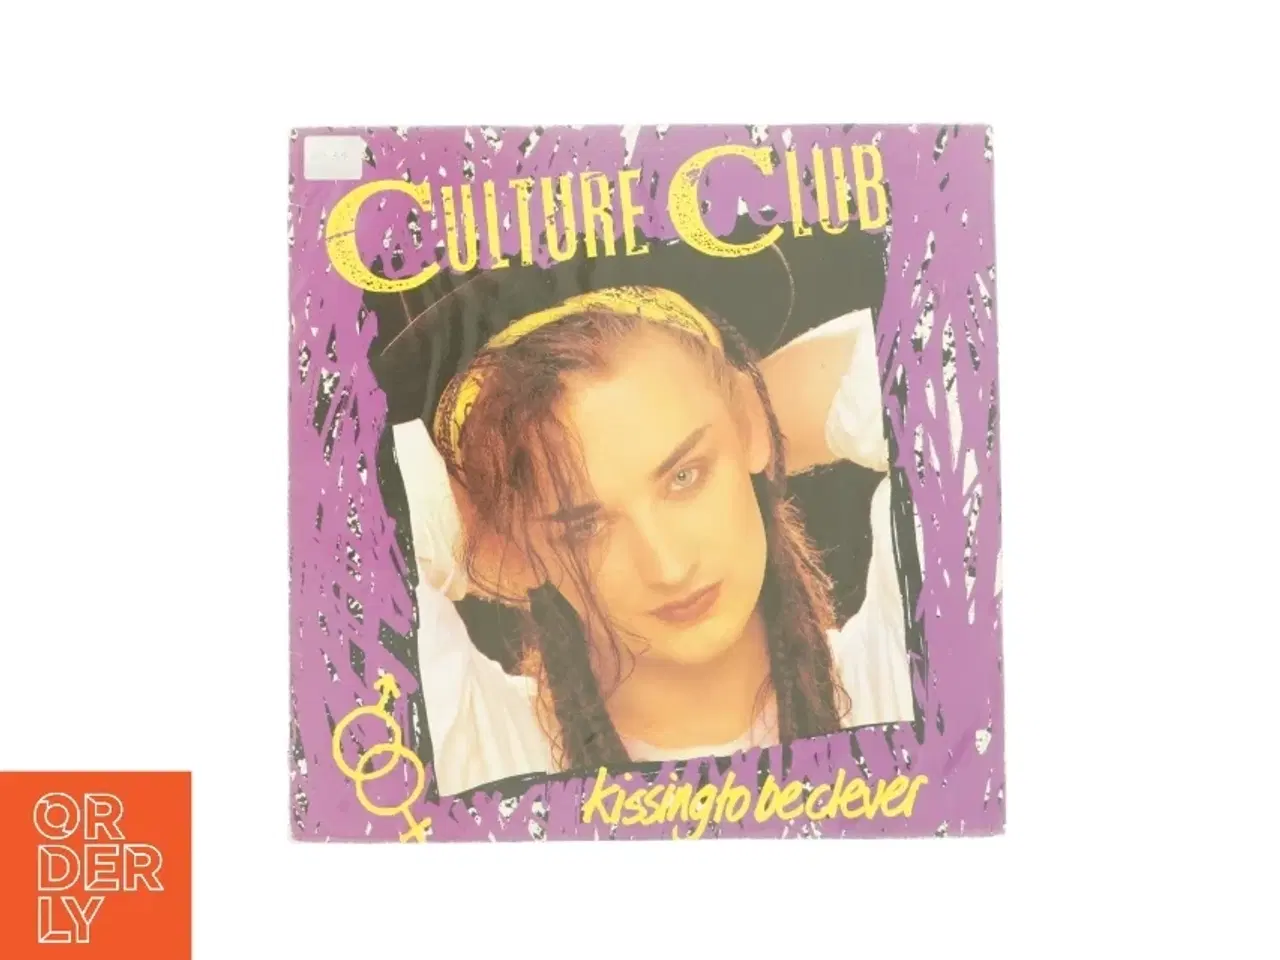 Billede 1 - Cultur Club - Kissing to be clever (LP)